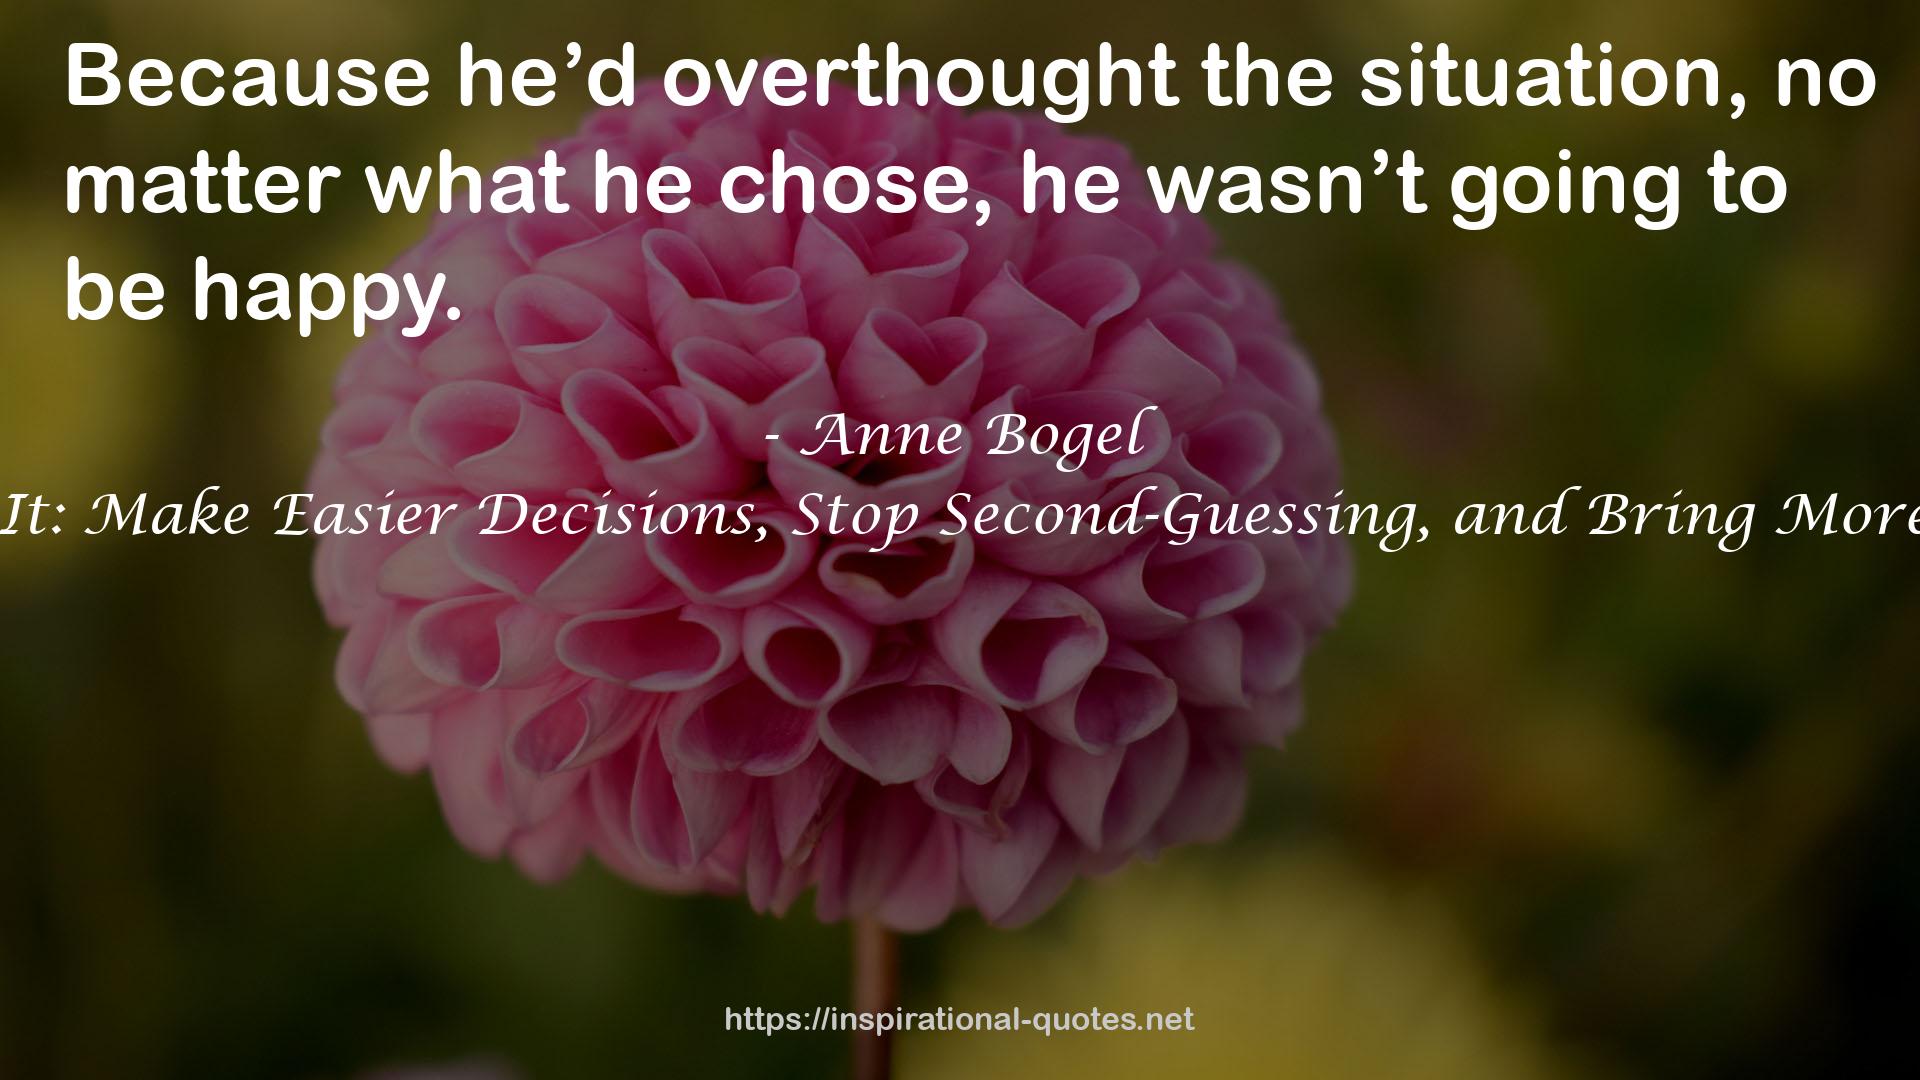 Anne Bogel QUOTES